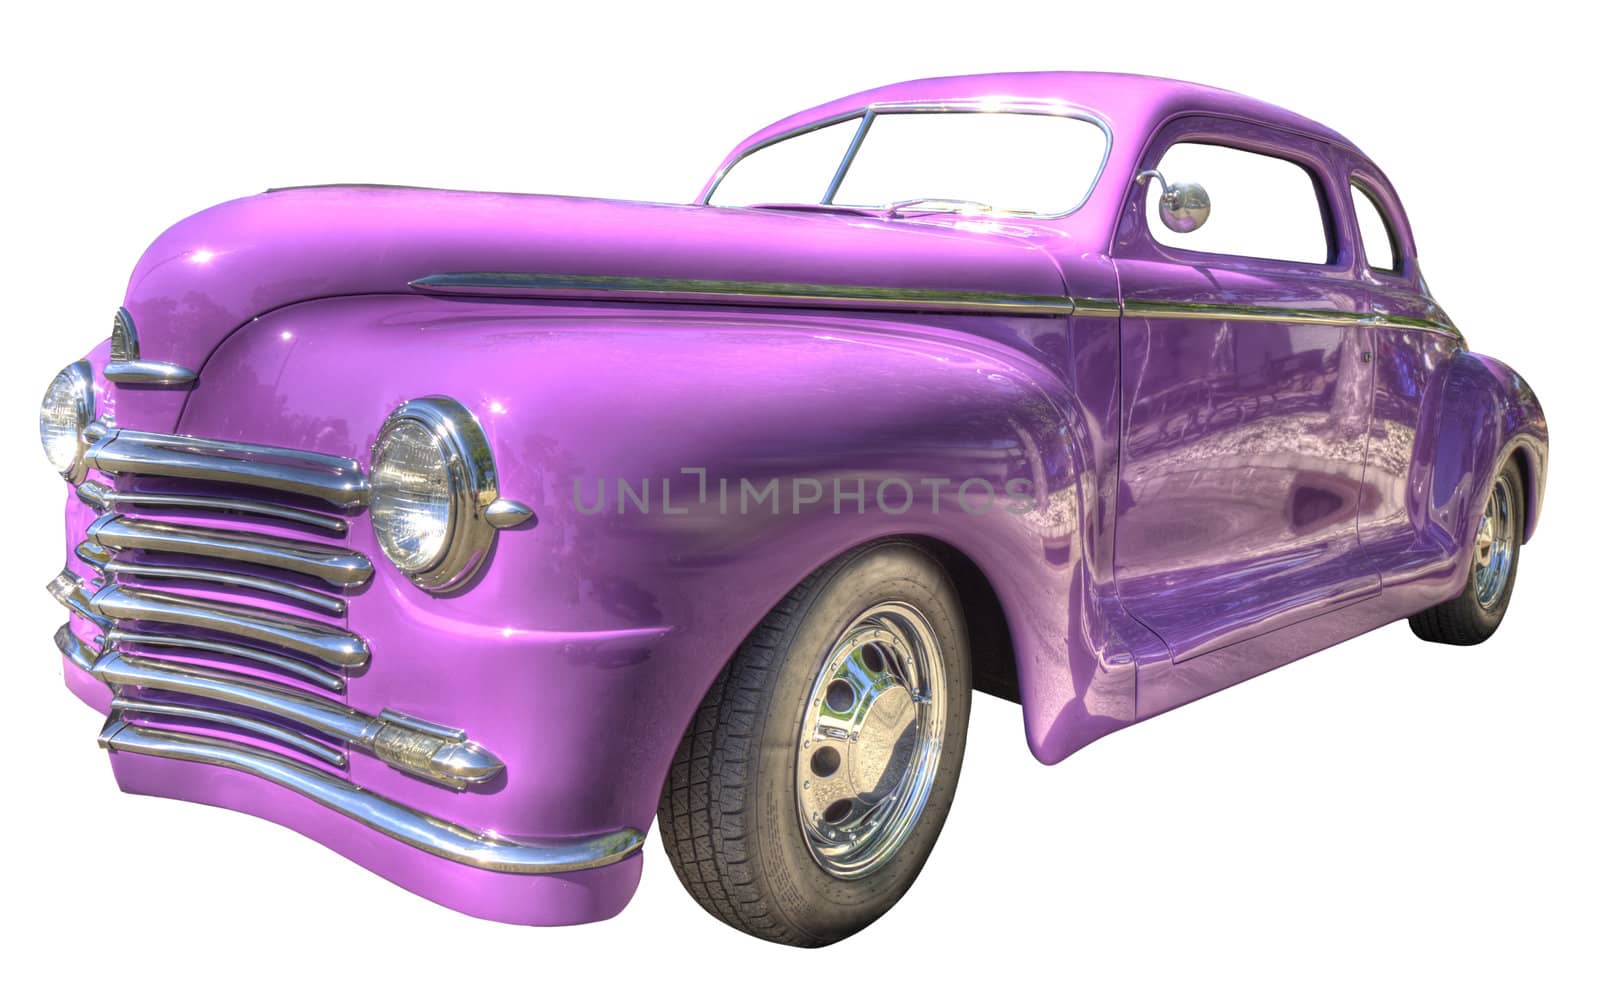 An old purple car from the 50's